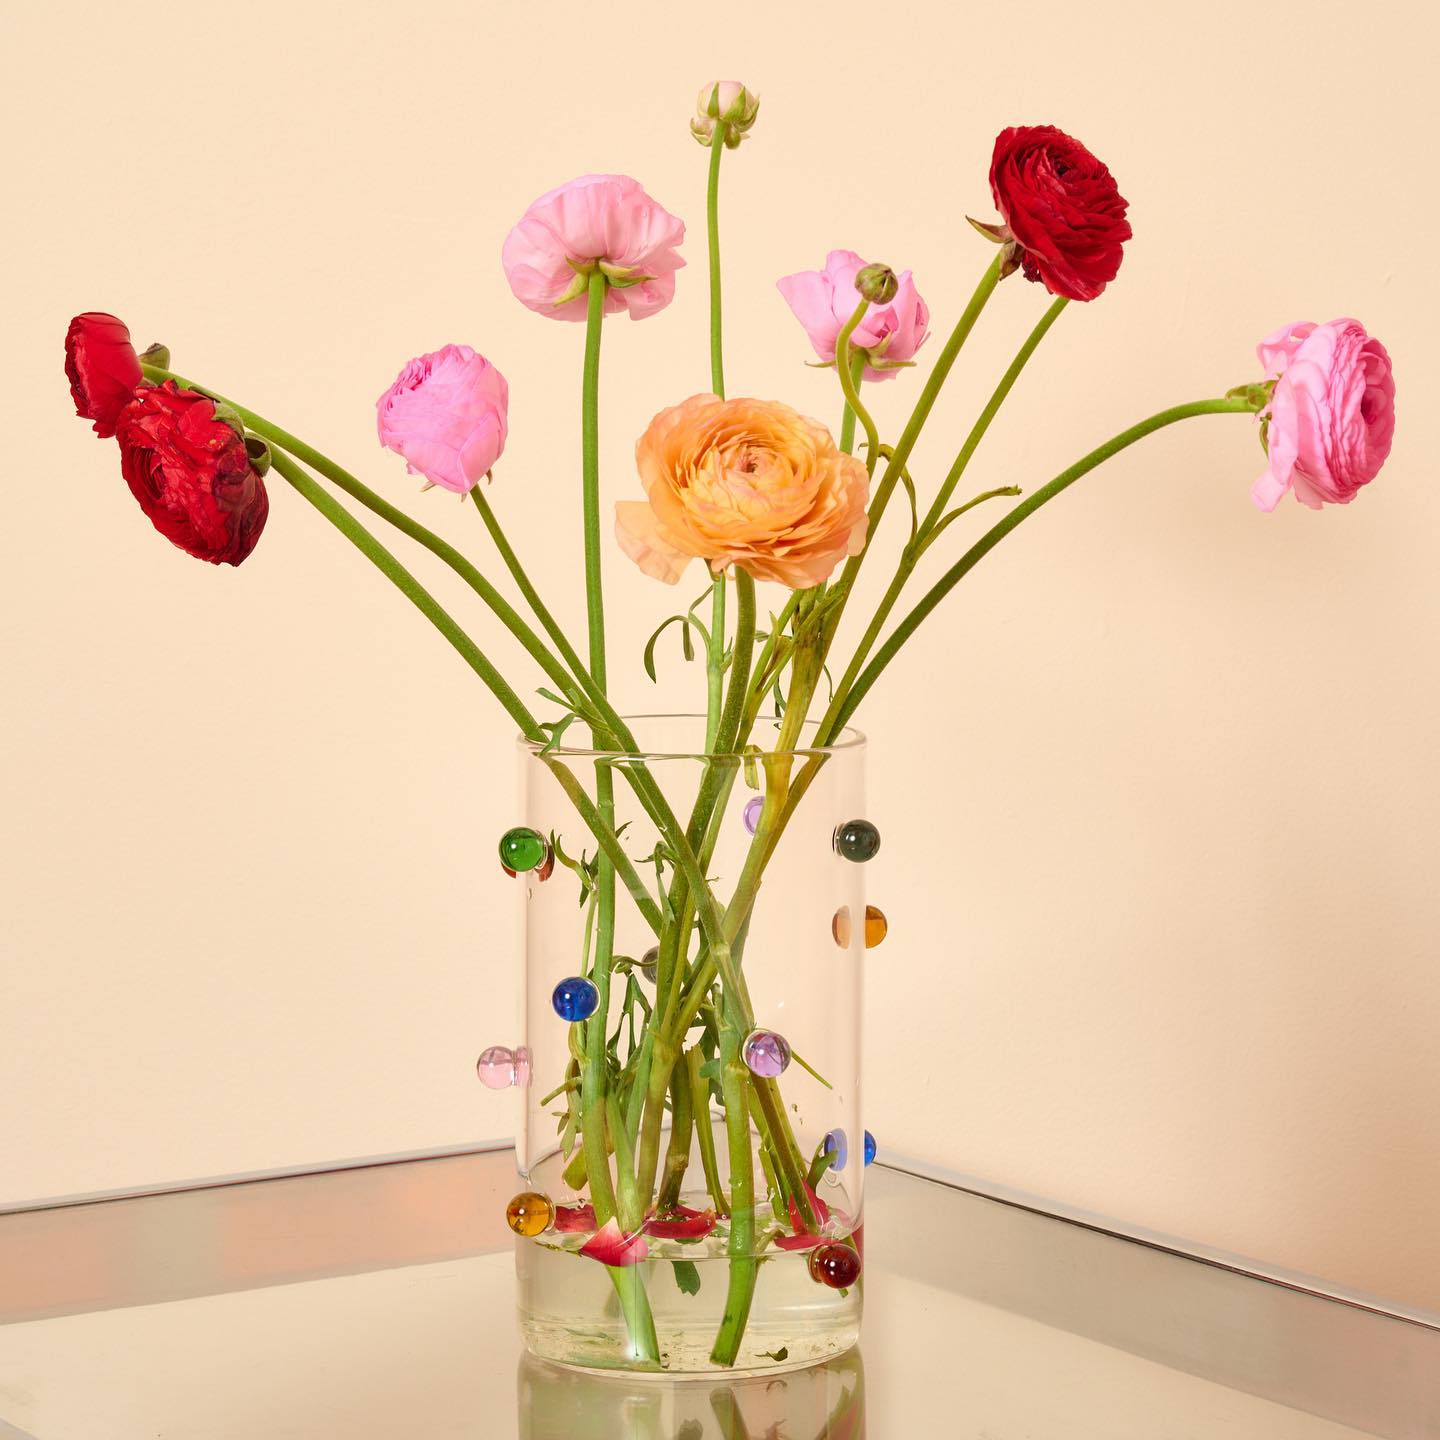 Image by @comingsoonny featuring our Pomponette Vase filled with ranunculus flowers.